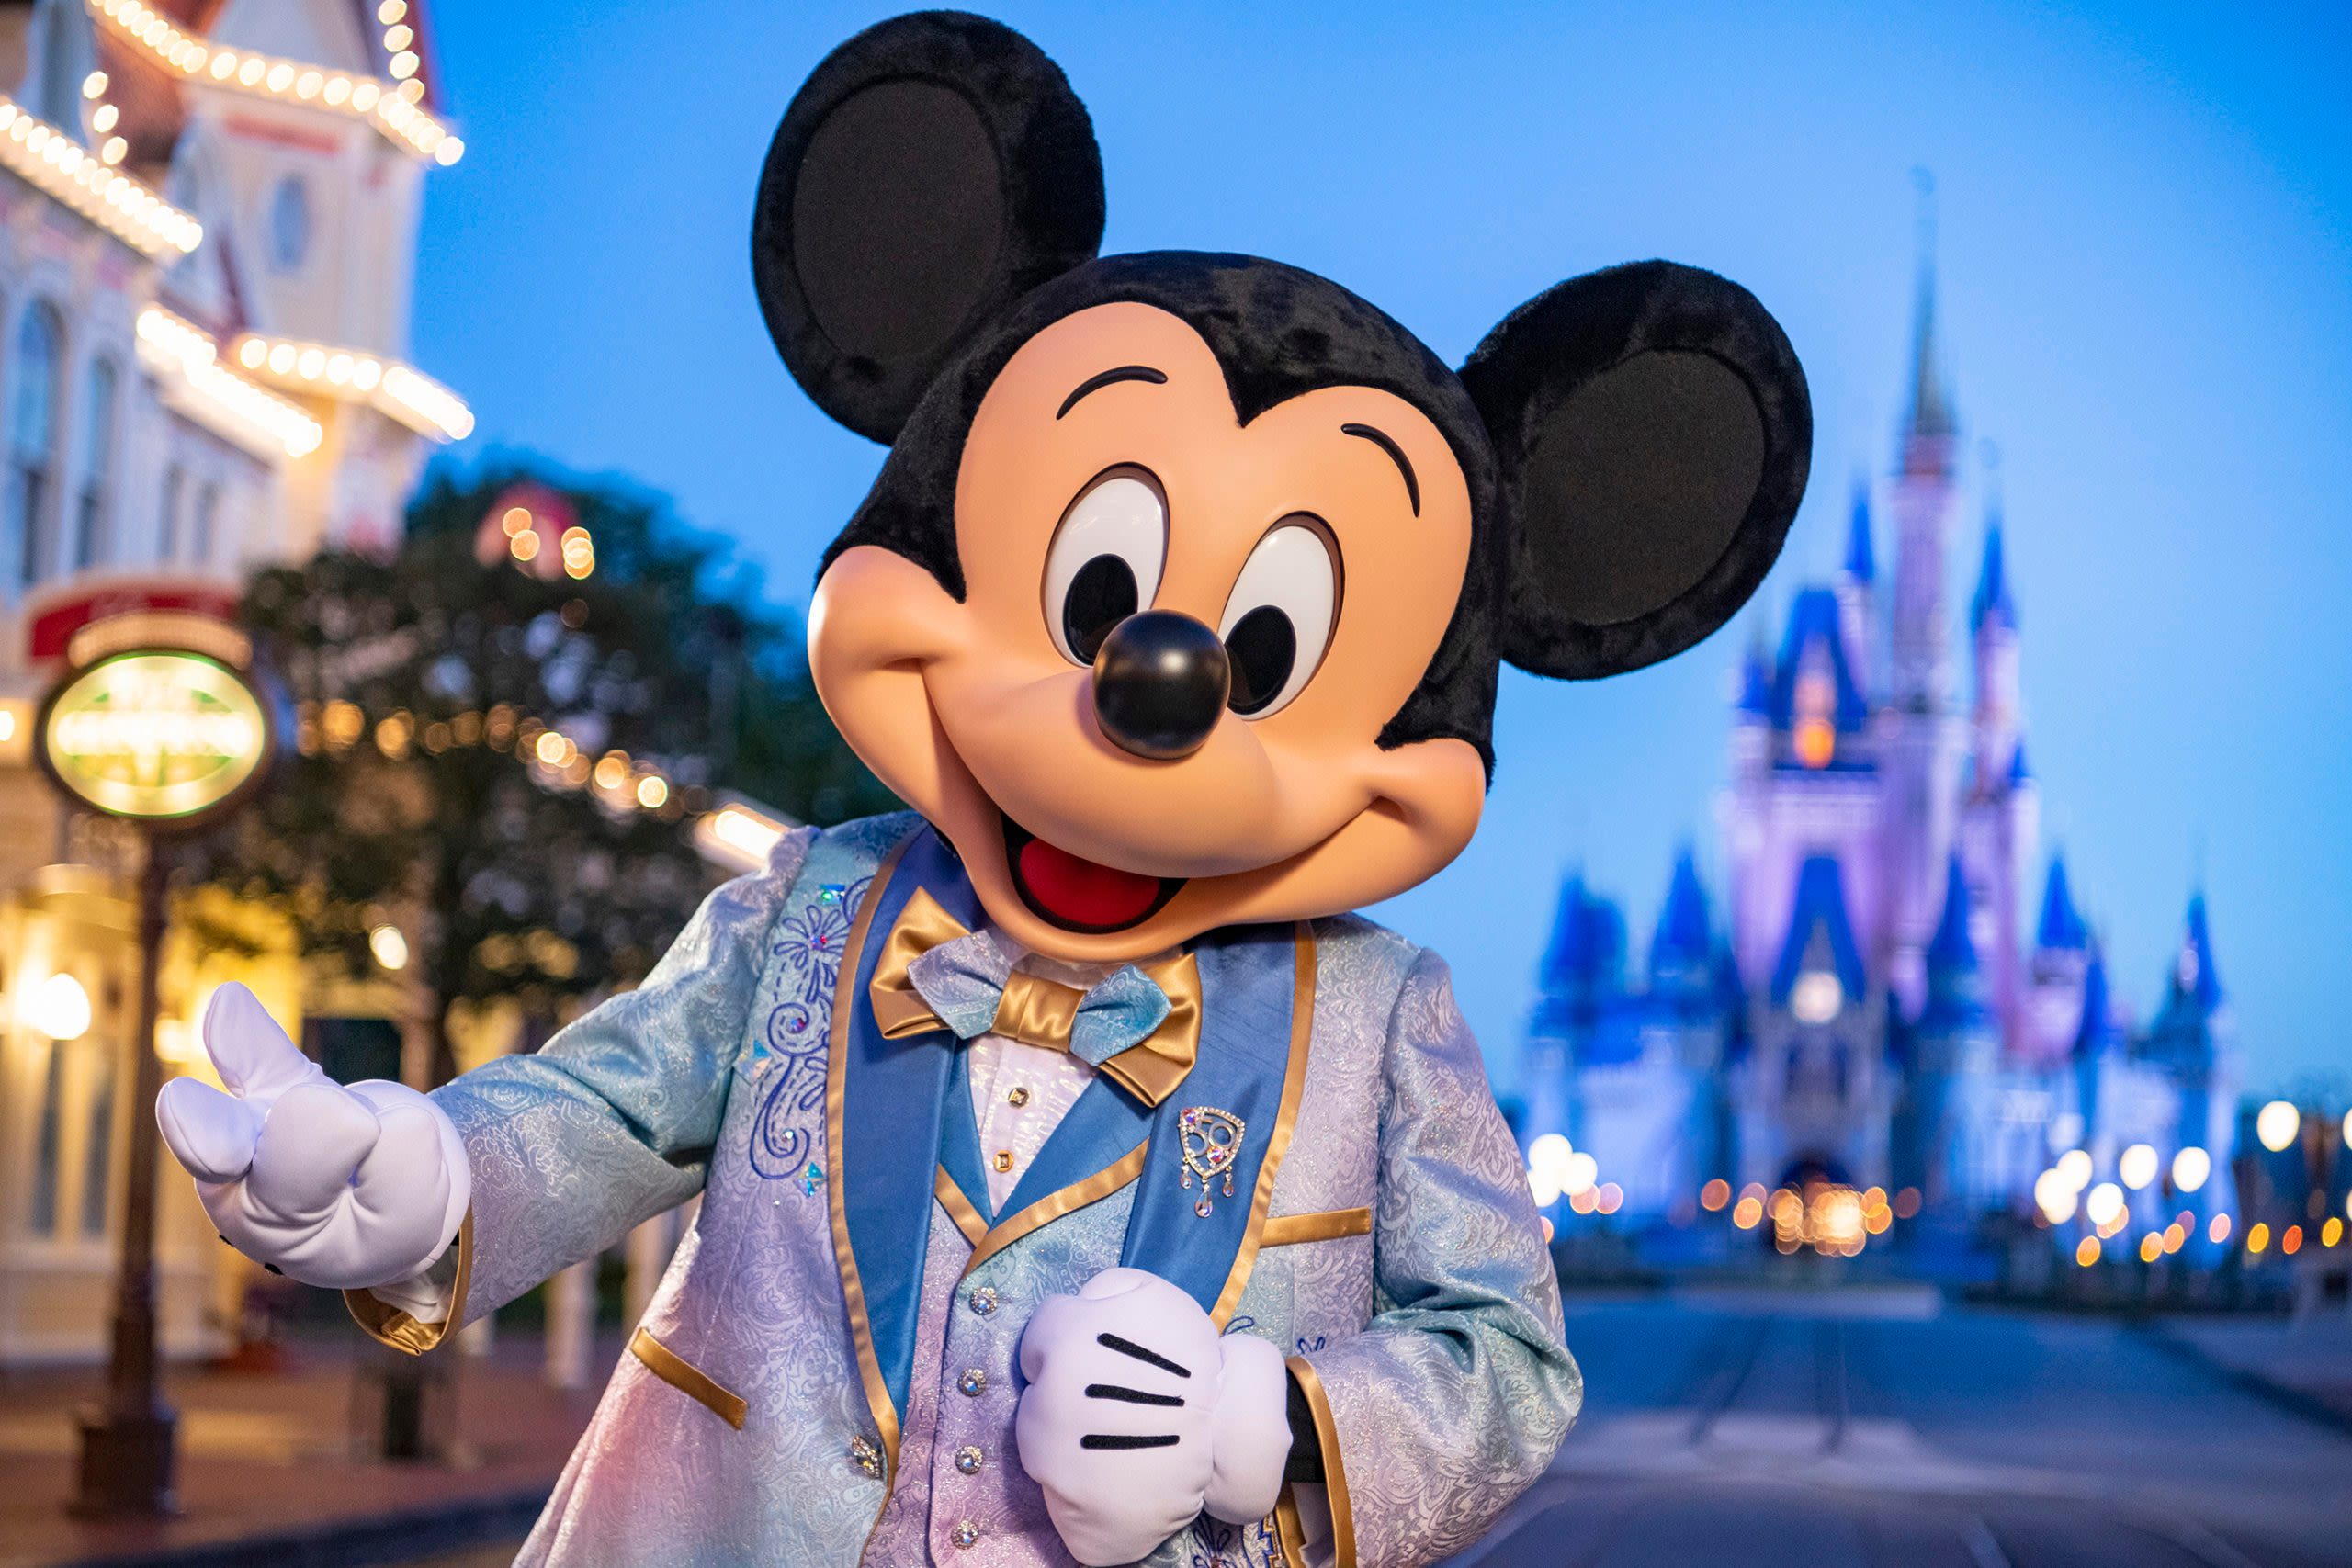 What to Know About International Disney Parks